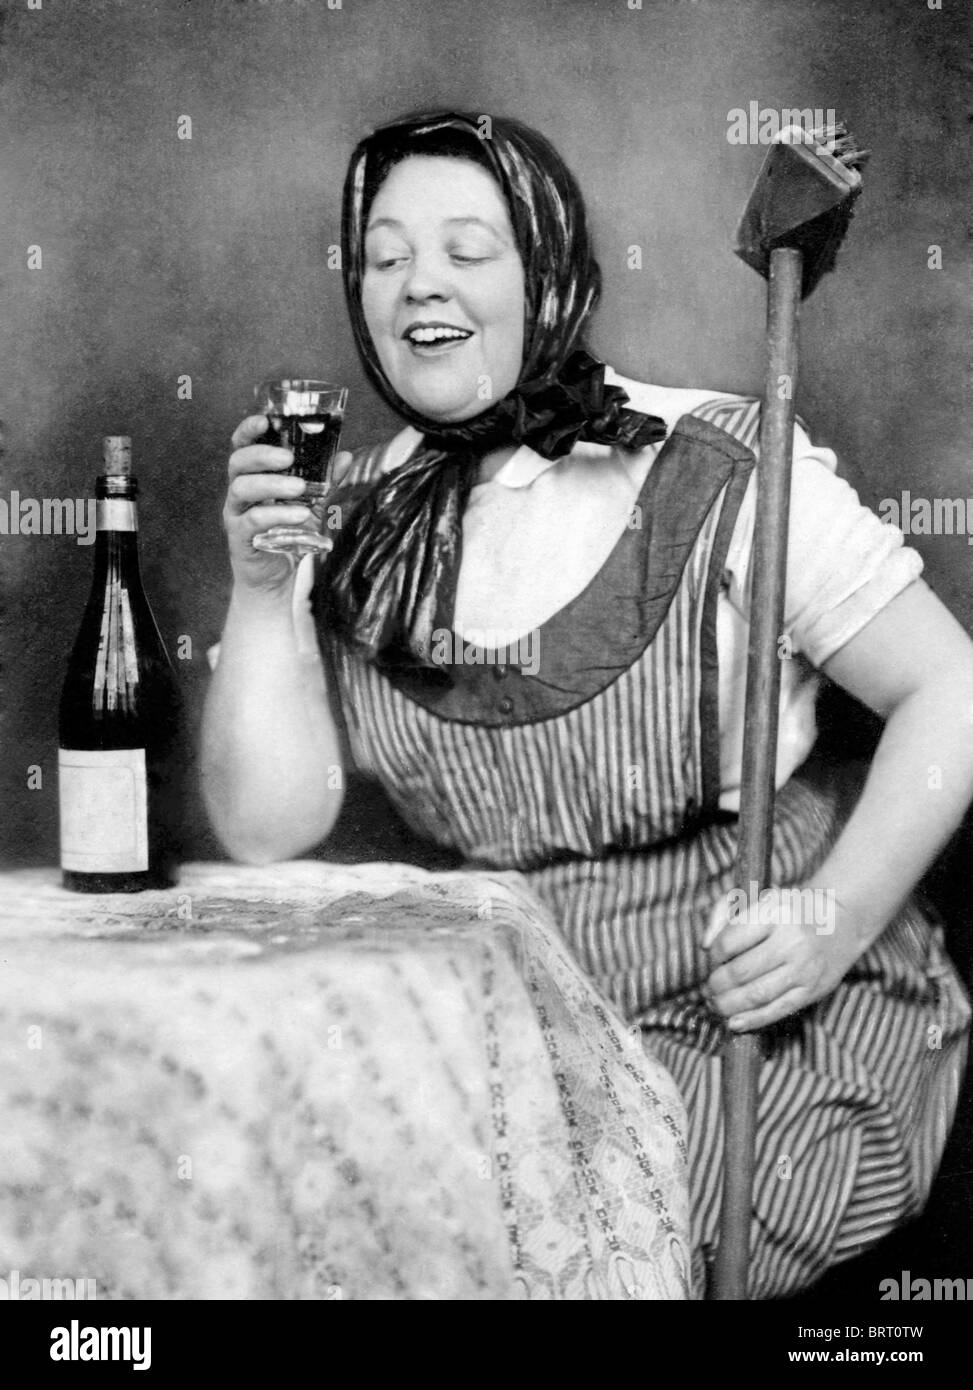 Cleaning lady drinking wine, historic photograph, around 1930 Stock Photo